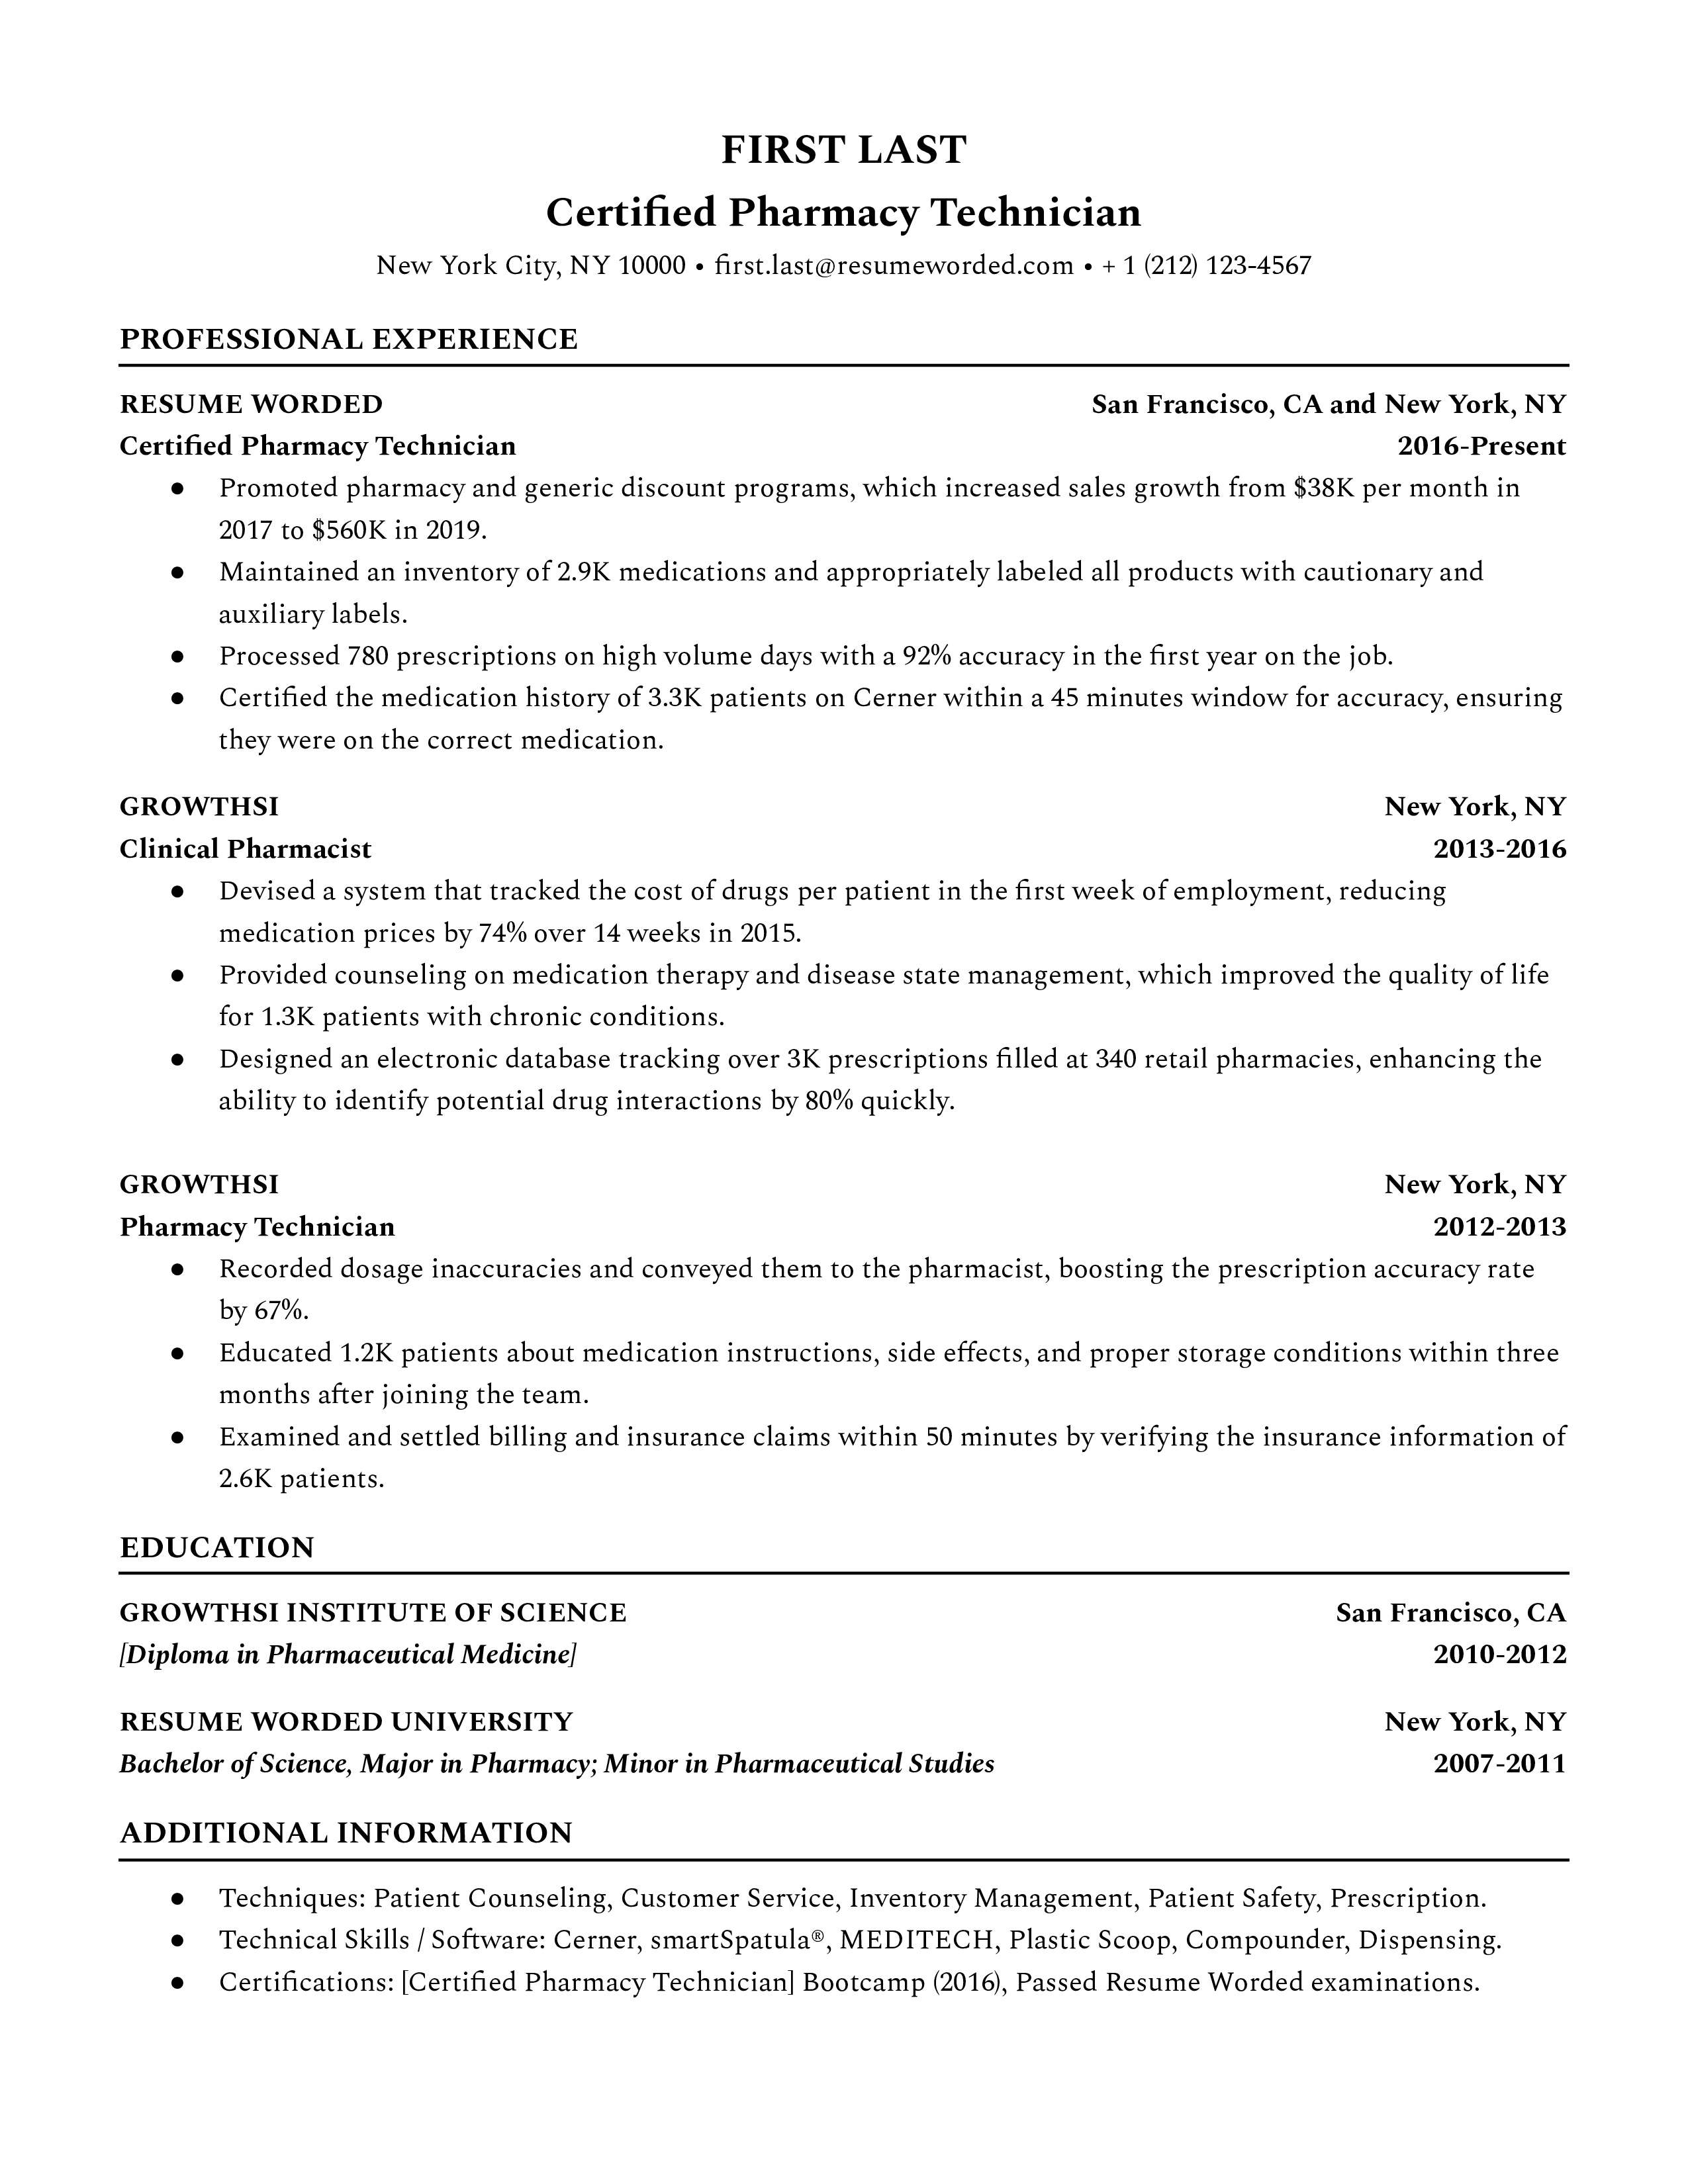 A certified pharmacy technician resume sample that highlights the applicant’s certifications and experience.